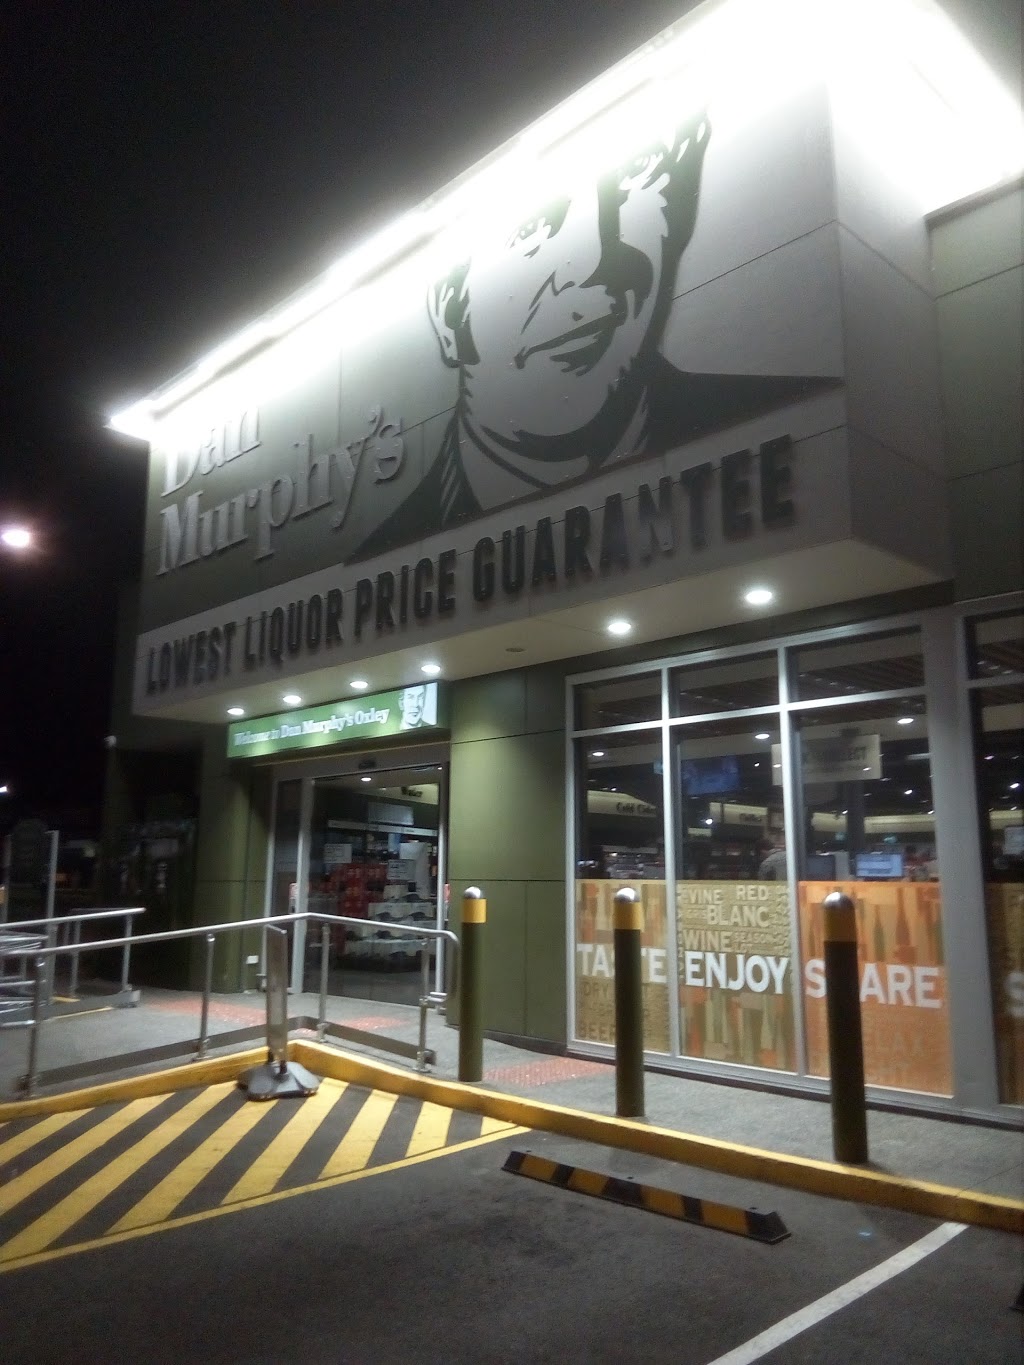 Dan Murphys Oxley | store | 146 Blunder Rd, Oxley QLD 4075, Australia | 1300723388 OR +61 1300 723 388